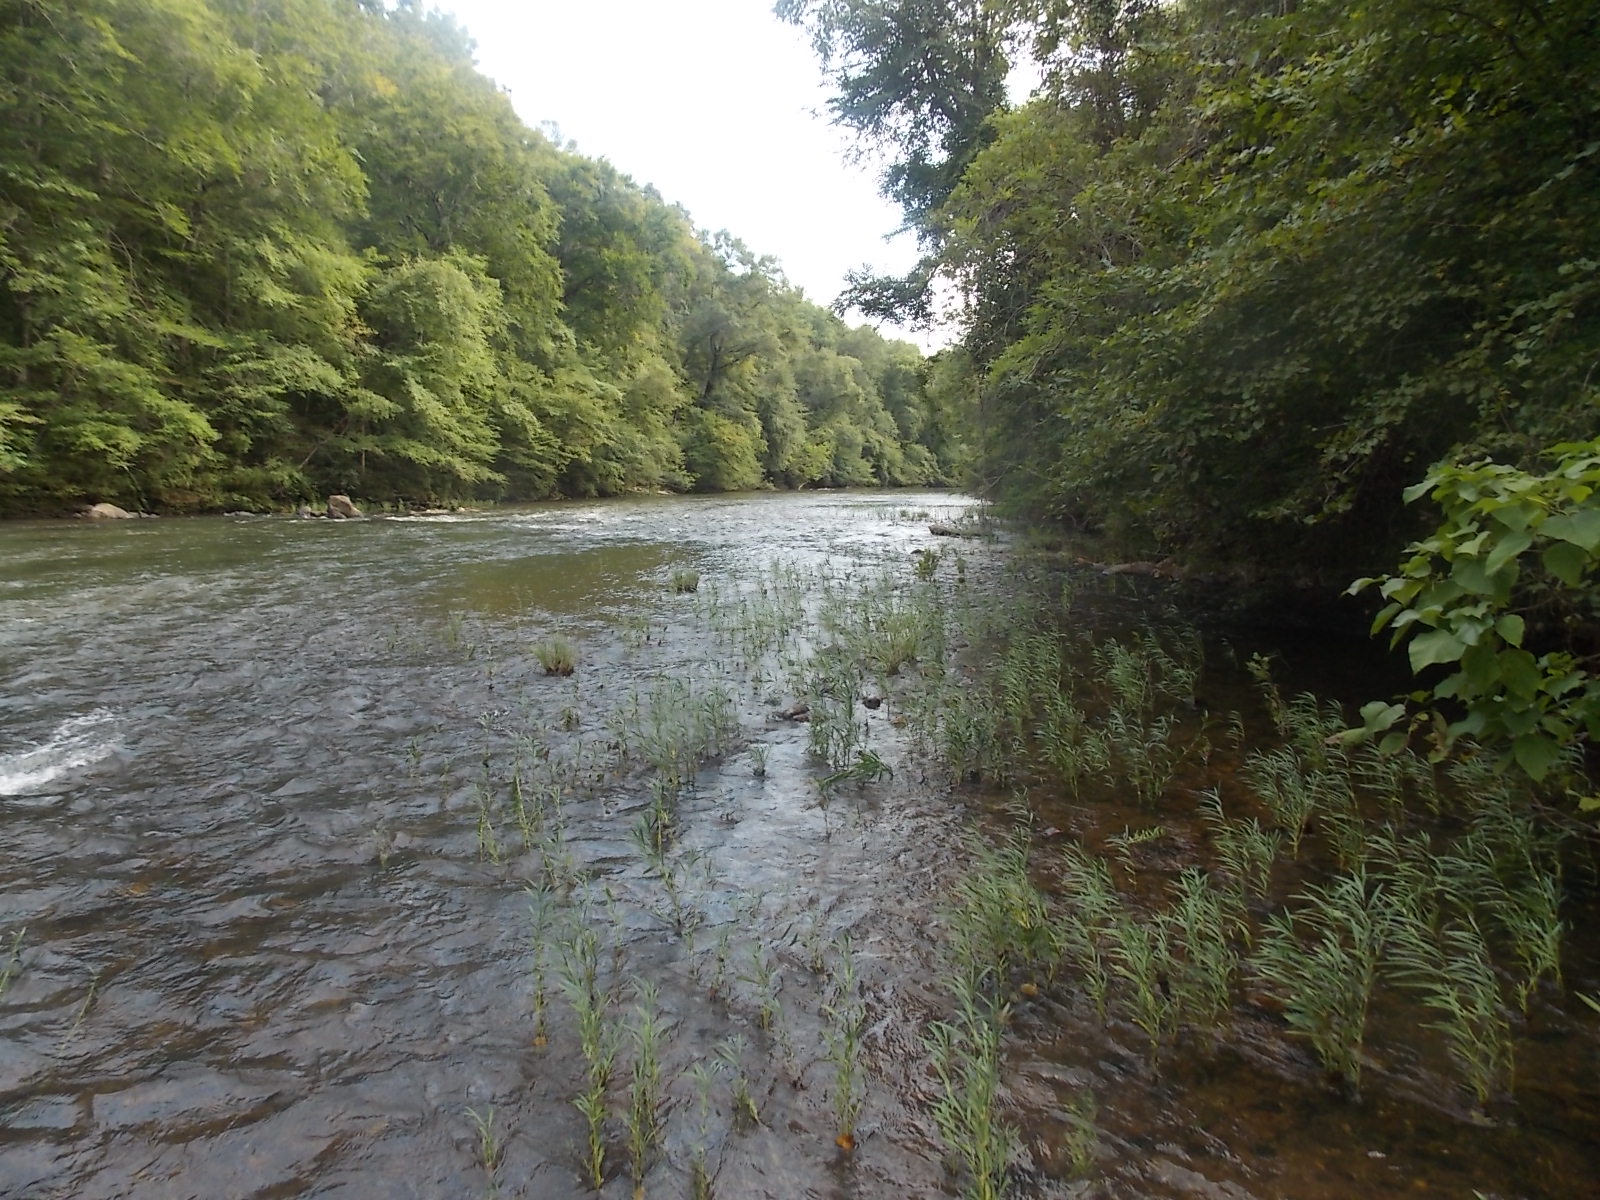 Looking south on Hatchet Creek (prop. on the right)